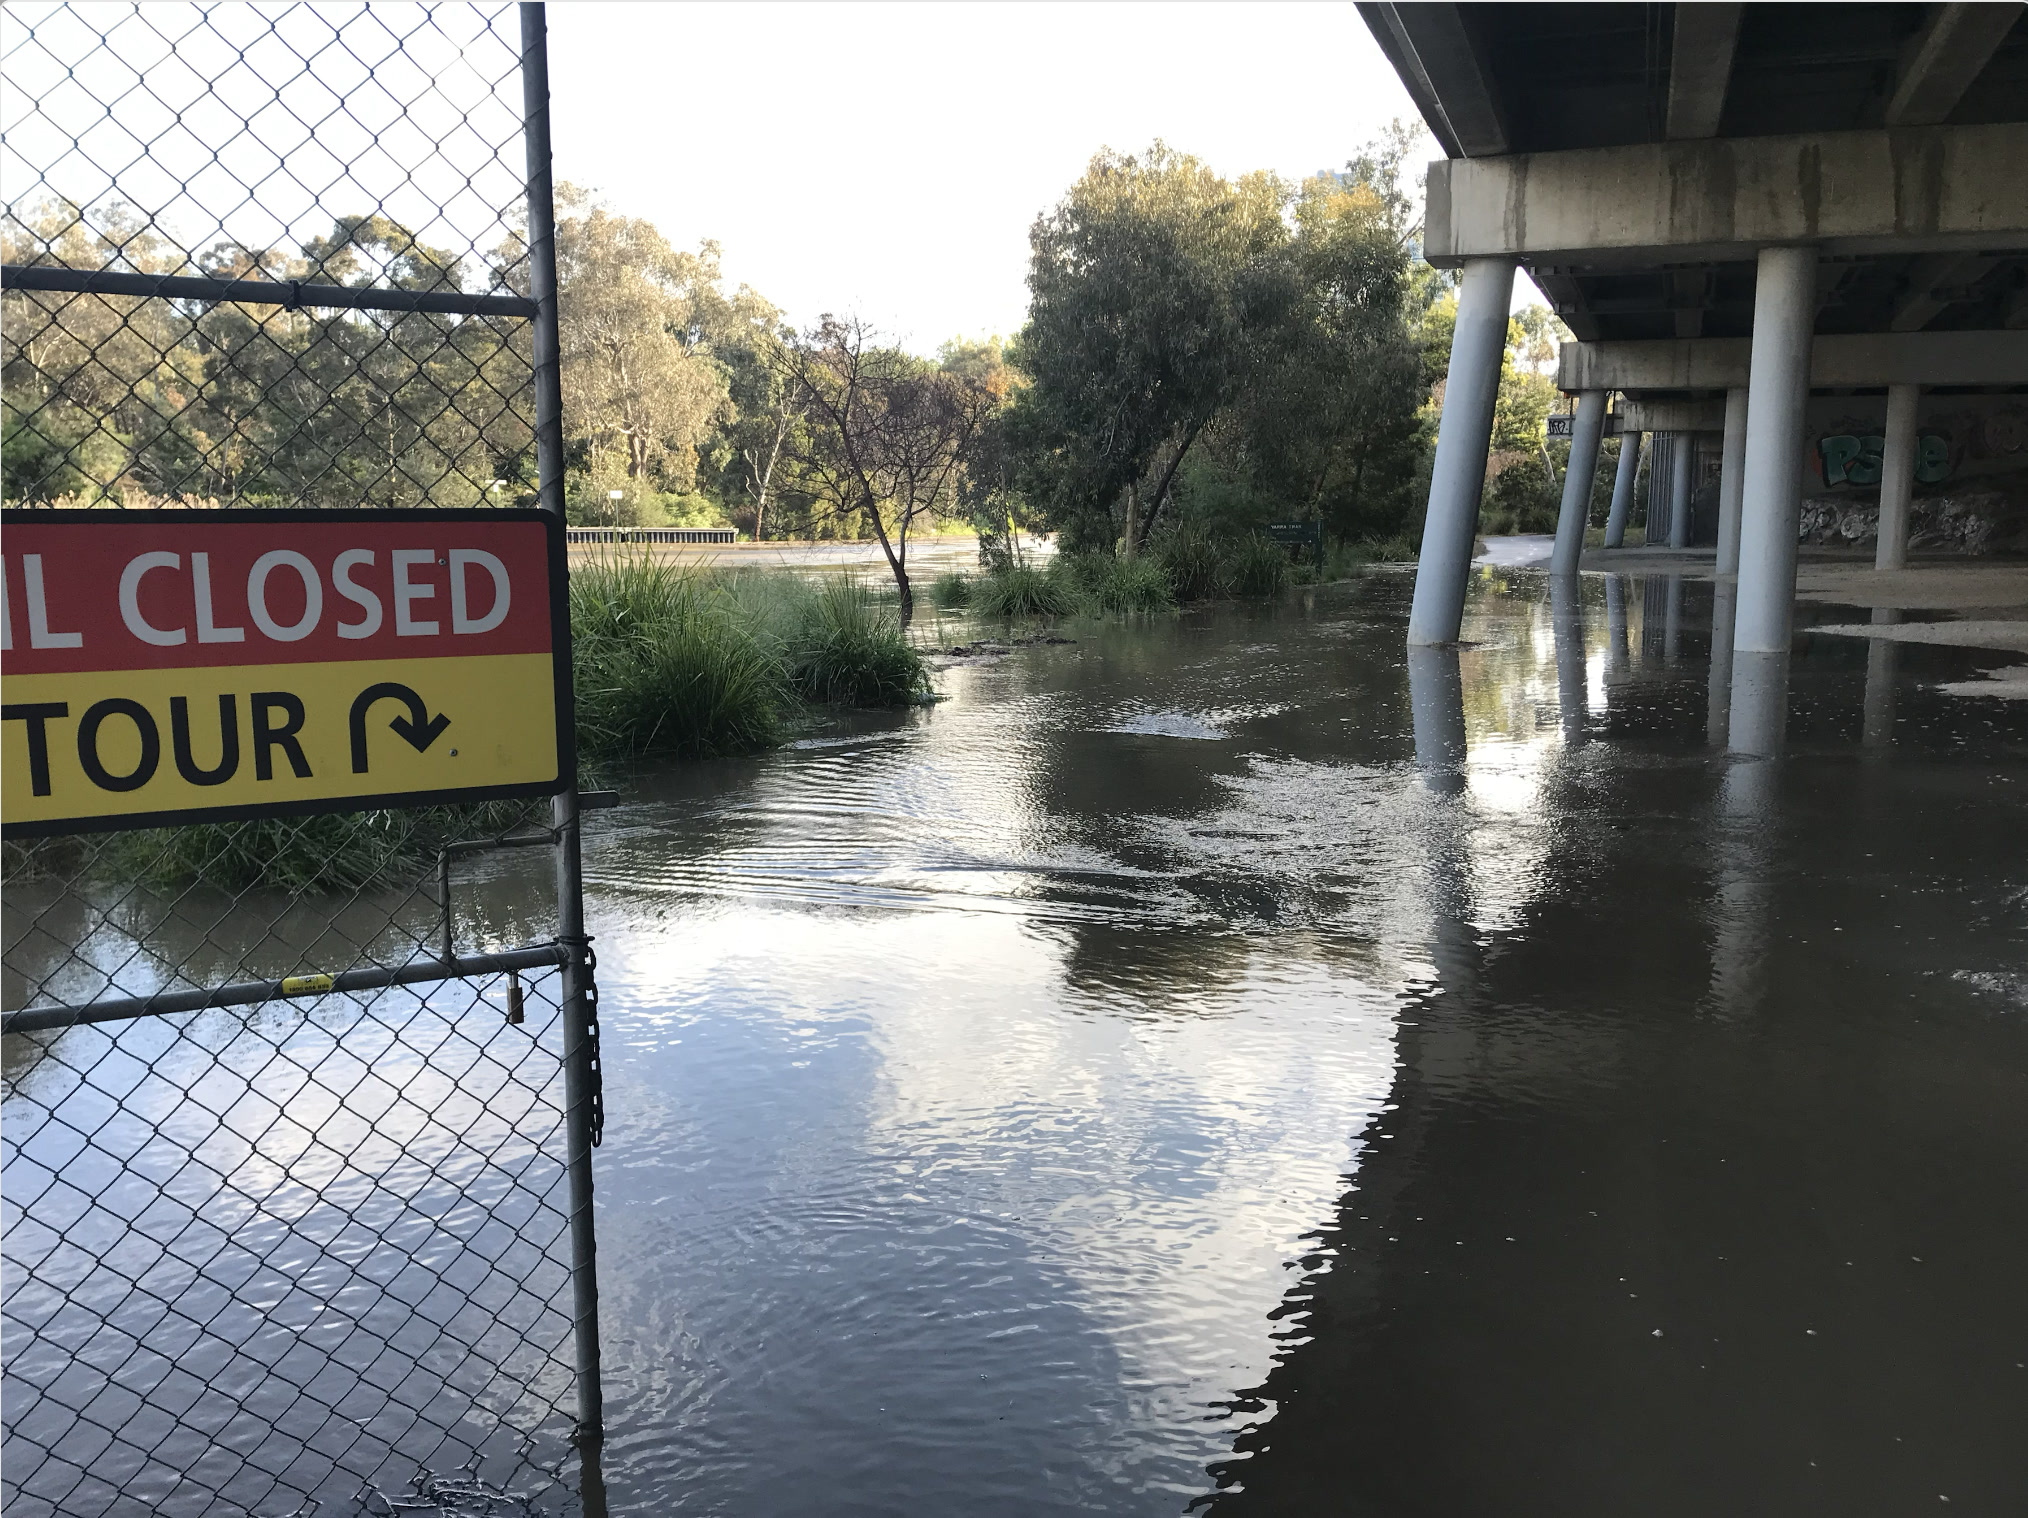 Burnley bouldering walls being flooded by the Yarra river